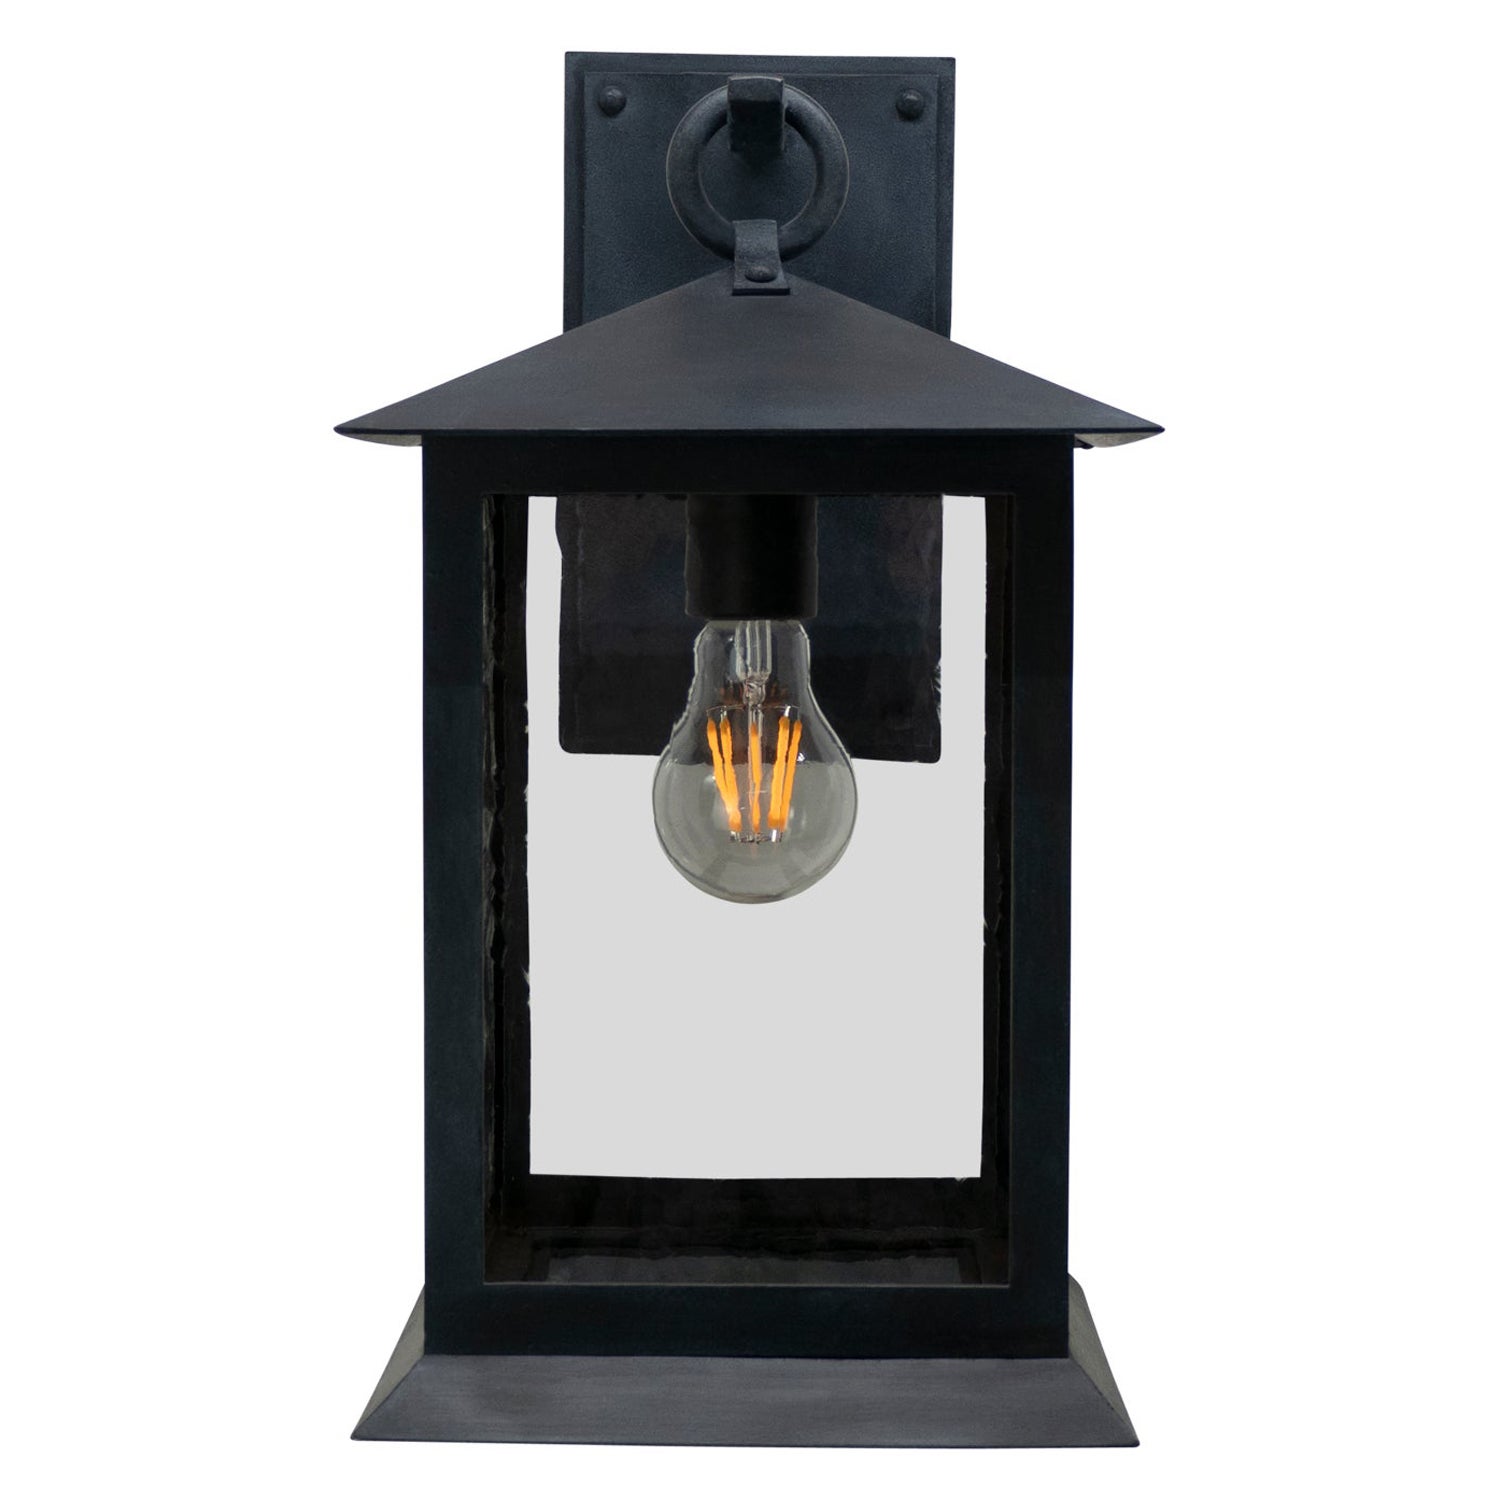 Traditional Contemporary Minimal Style Wrought Iron Wall Sconce Light Fixture